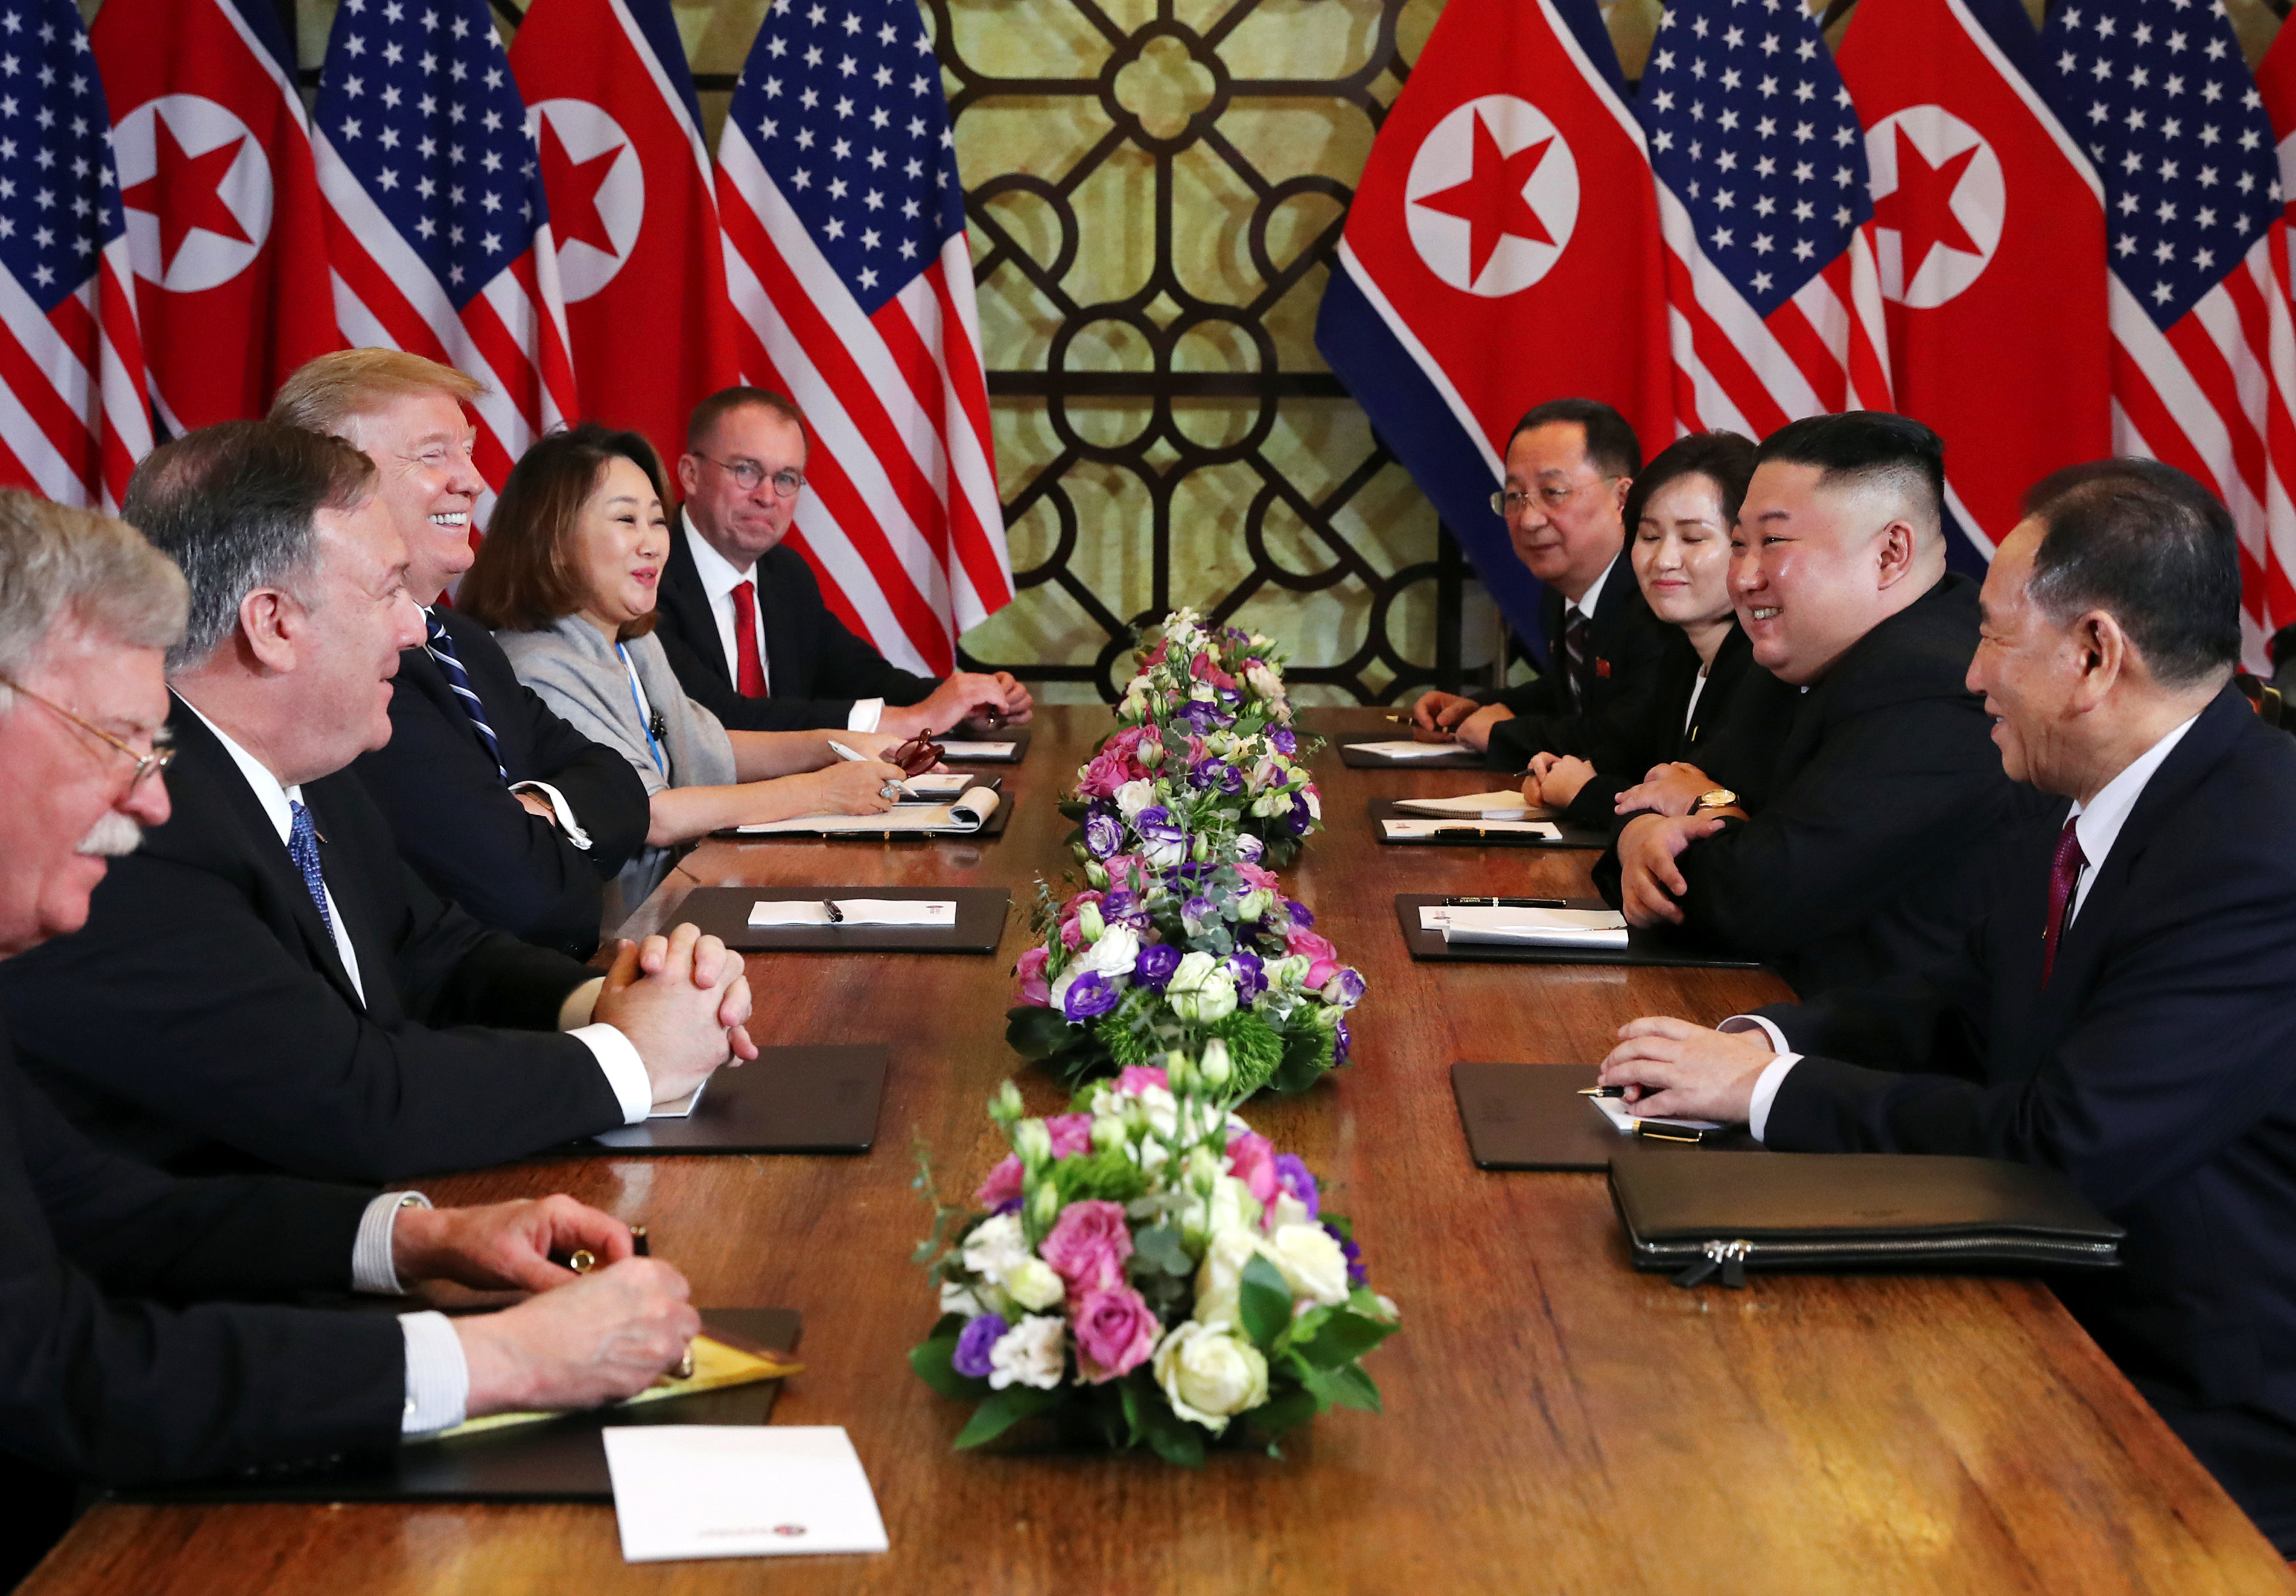 North Korea's leader Kim Jong Un and U.S. President Donald Trump attend the extended bilateral meeting in the Metropole hotel with their aides, during the second North Korea-U.S. summit in Hanoi, Vietnam February 28, 2019. Photo: Reuters